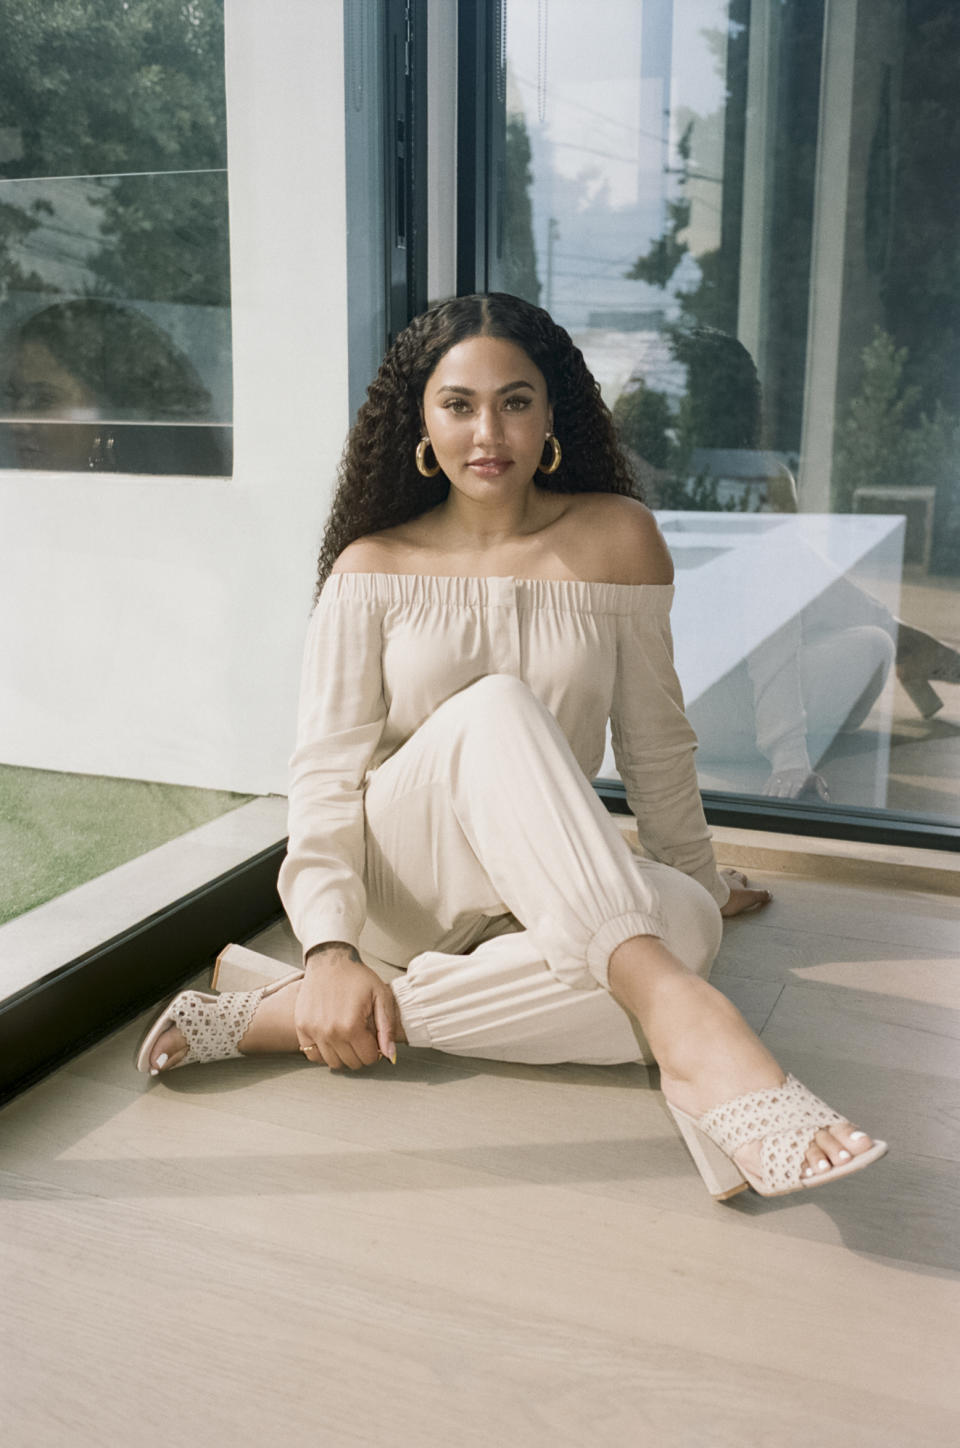 Ayesha Curry models styles from her JustFab collection. - Credit: Courtesy of JustFab